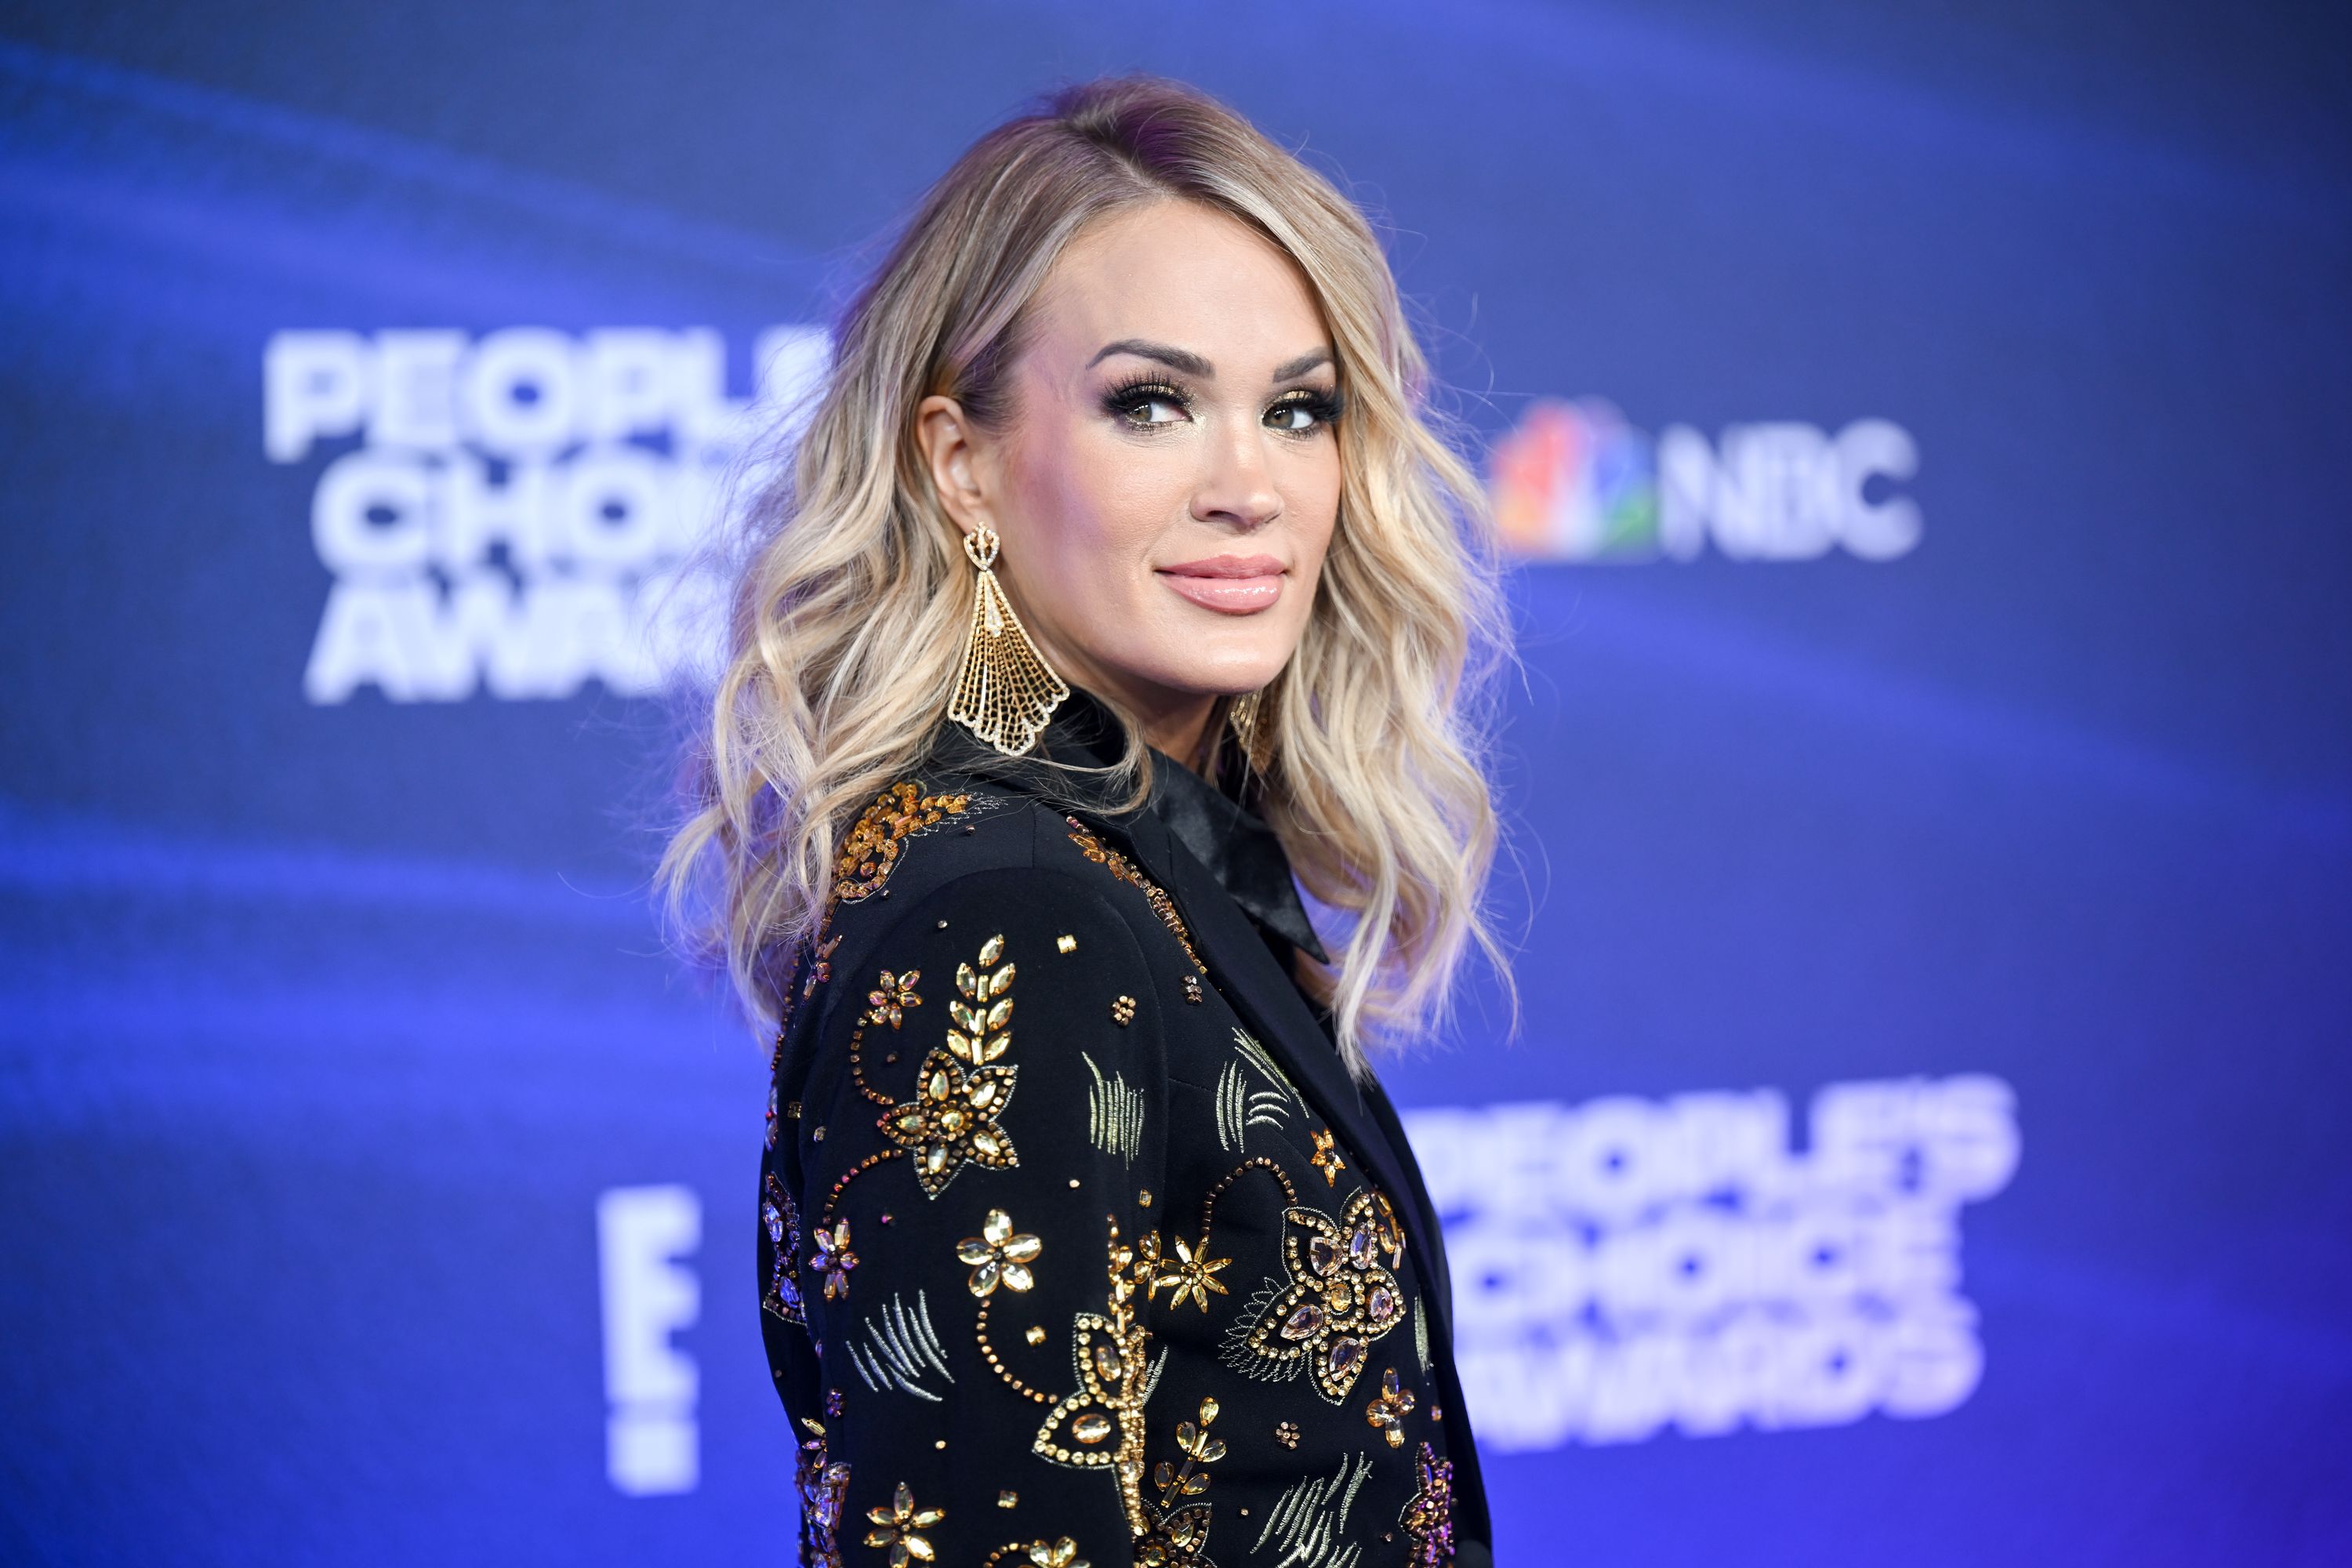 Carrie Underwood Surprises Fans in a Glowing Muscle Tee, Royal Blue Leggings  & Her Go-To Sneakers